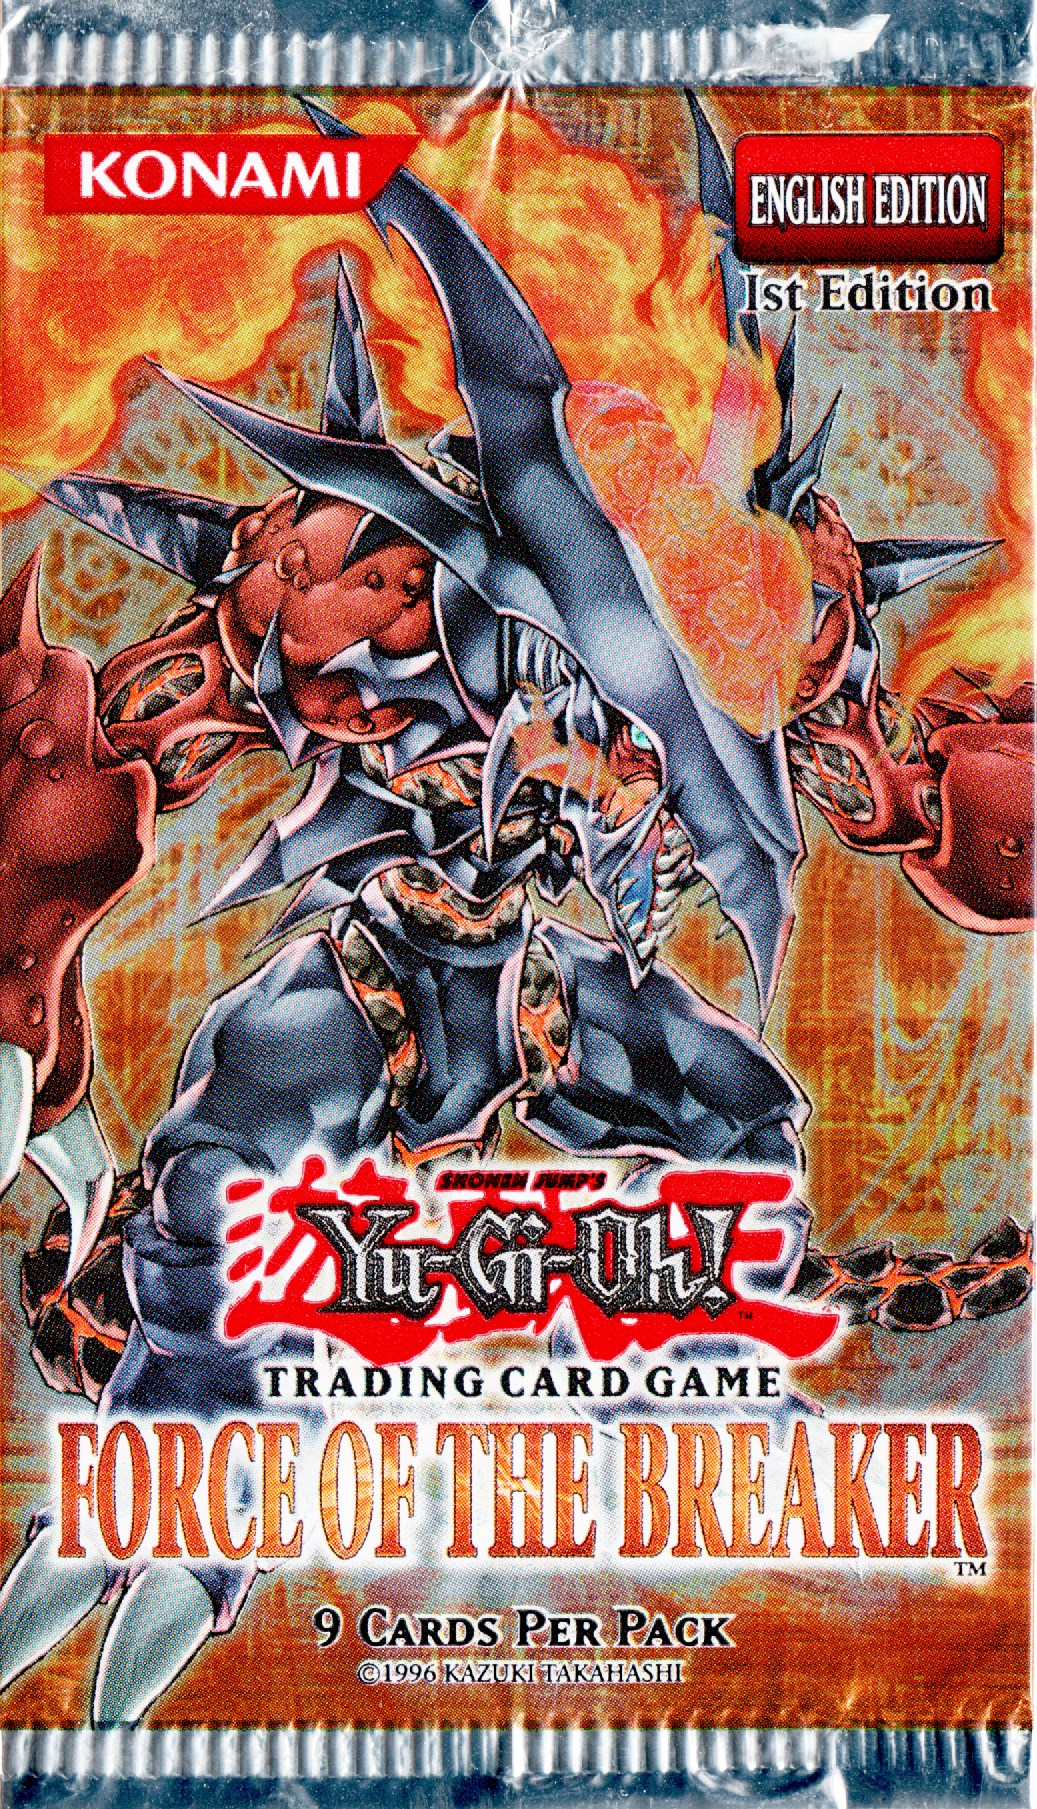 Force of the Breaker - Booster Pack [1st Edition]